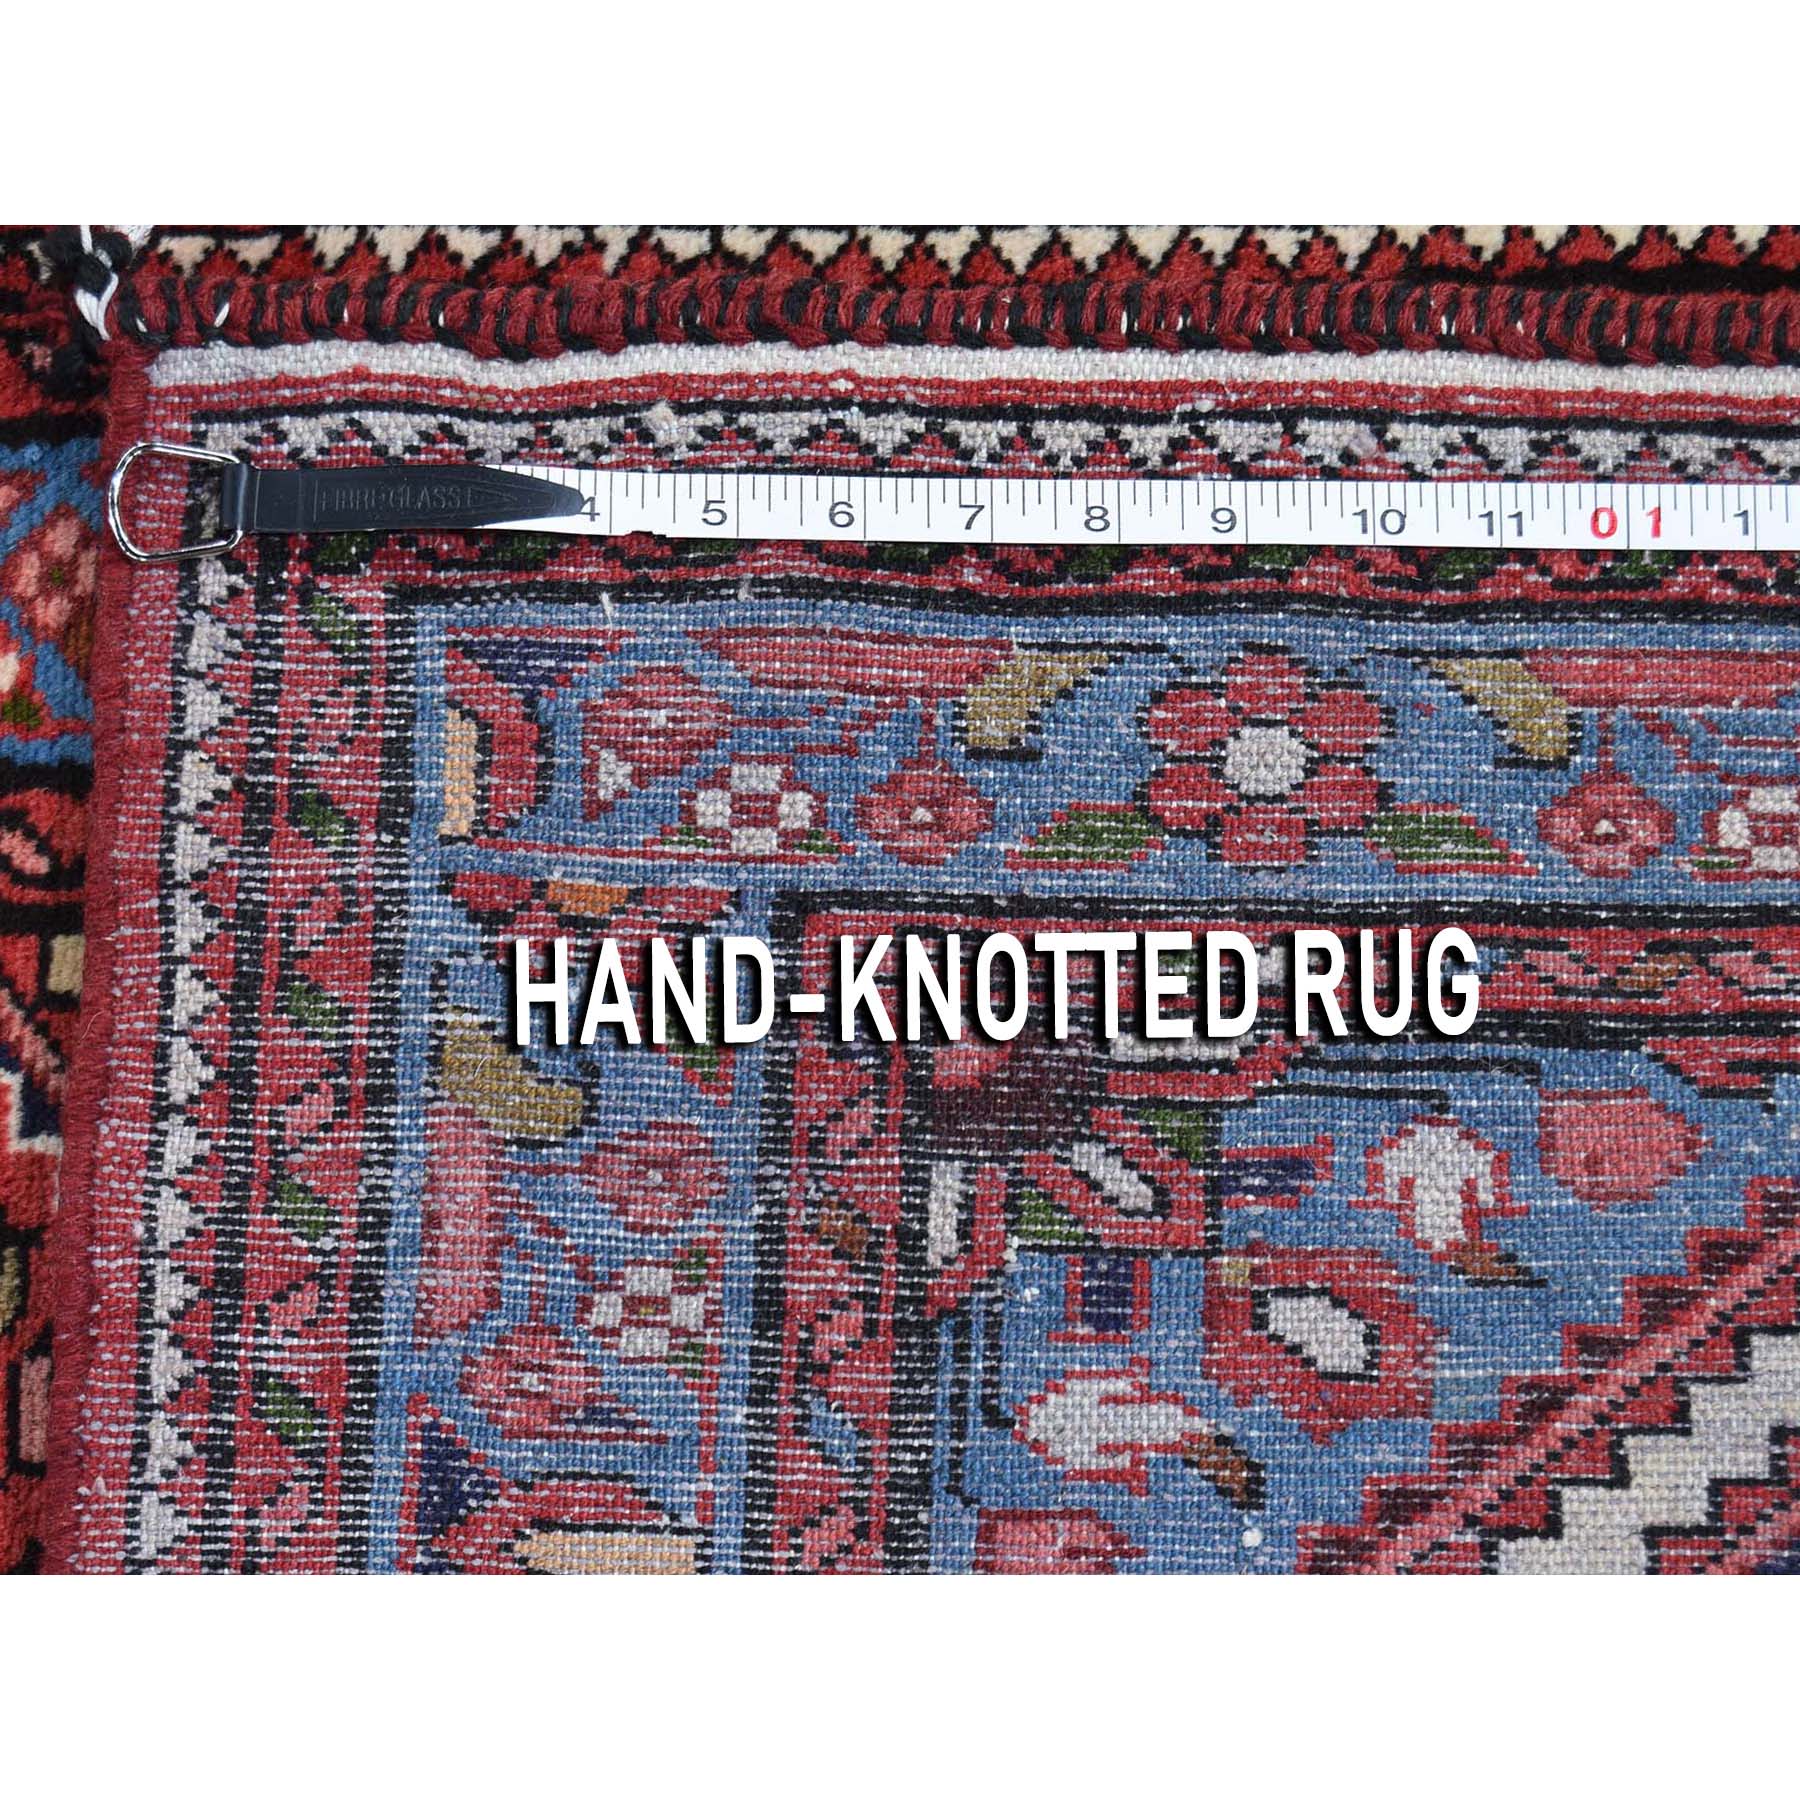 2-7 x16-9  Blue New Persian Hamadan Pure Wool XL Runner Hand-Knotted Oriental Rug 